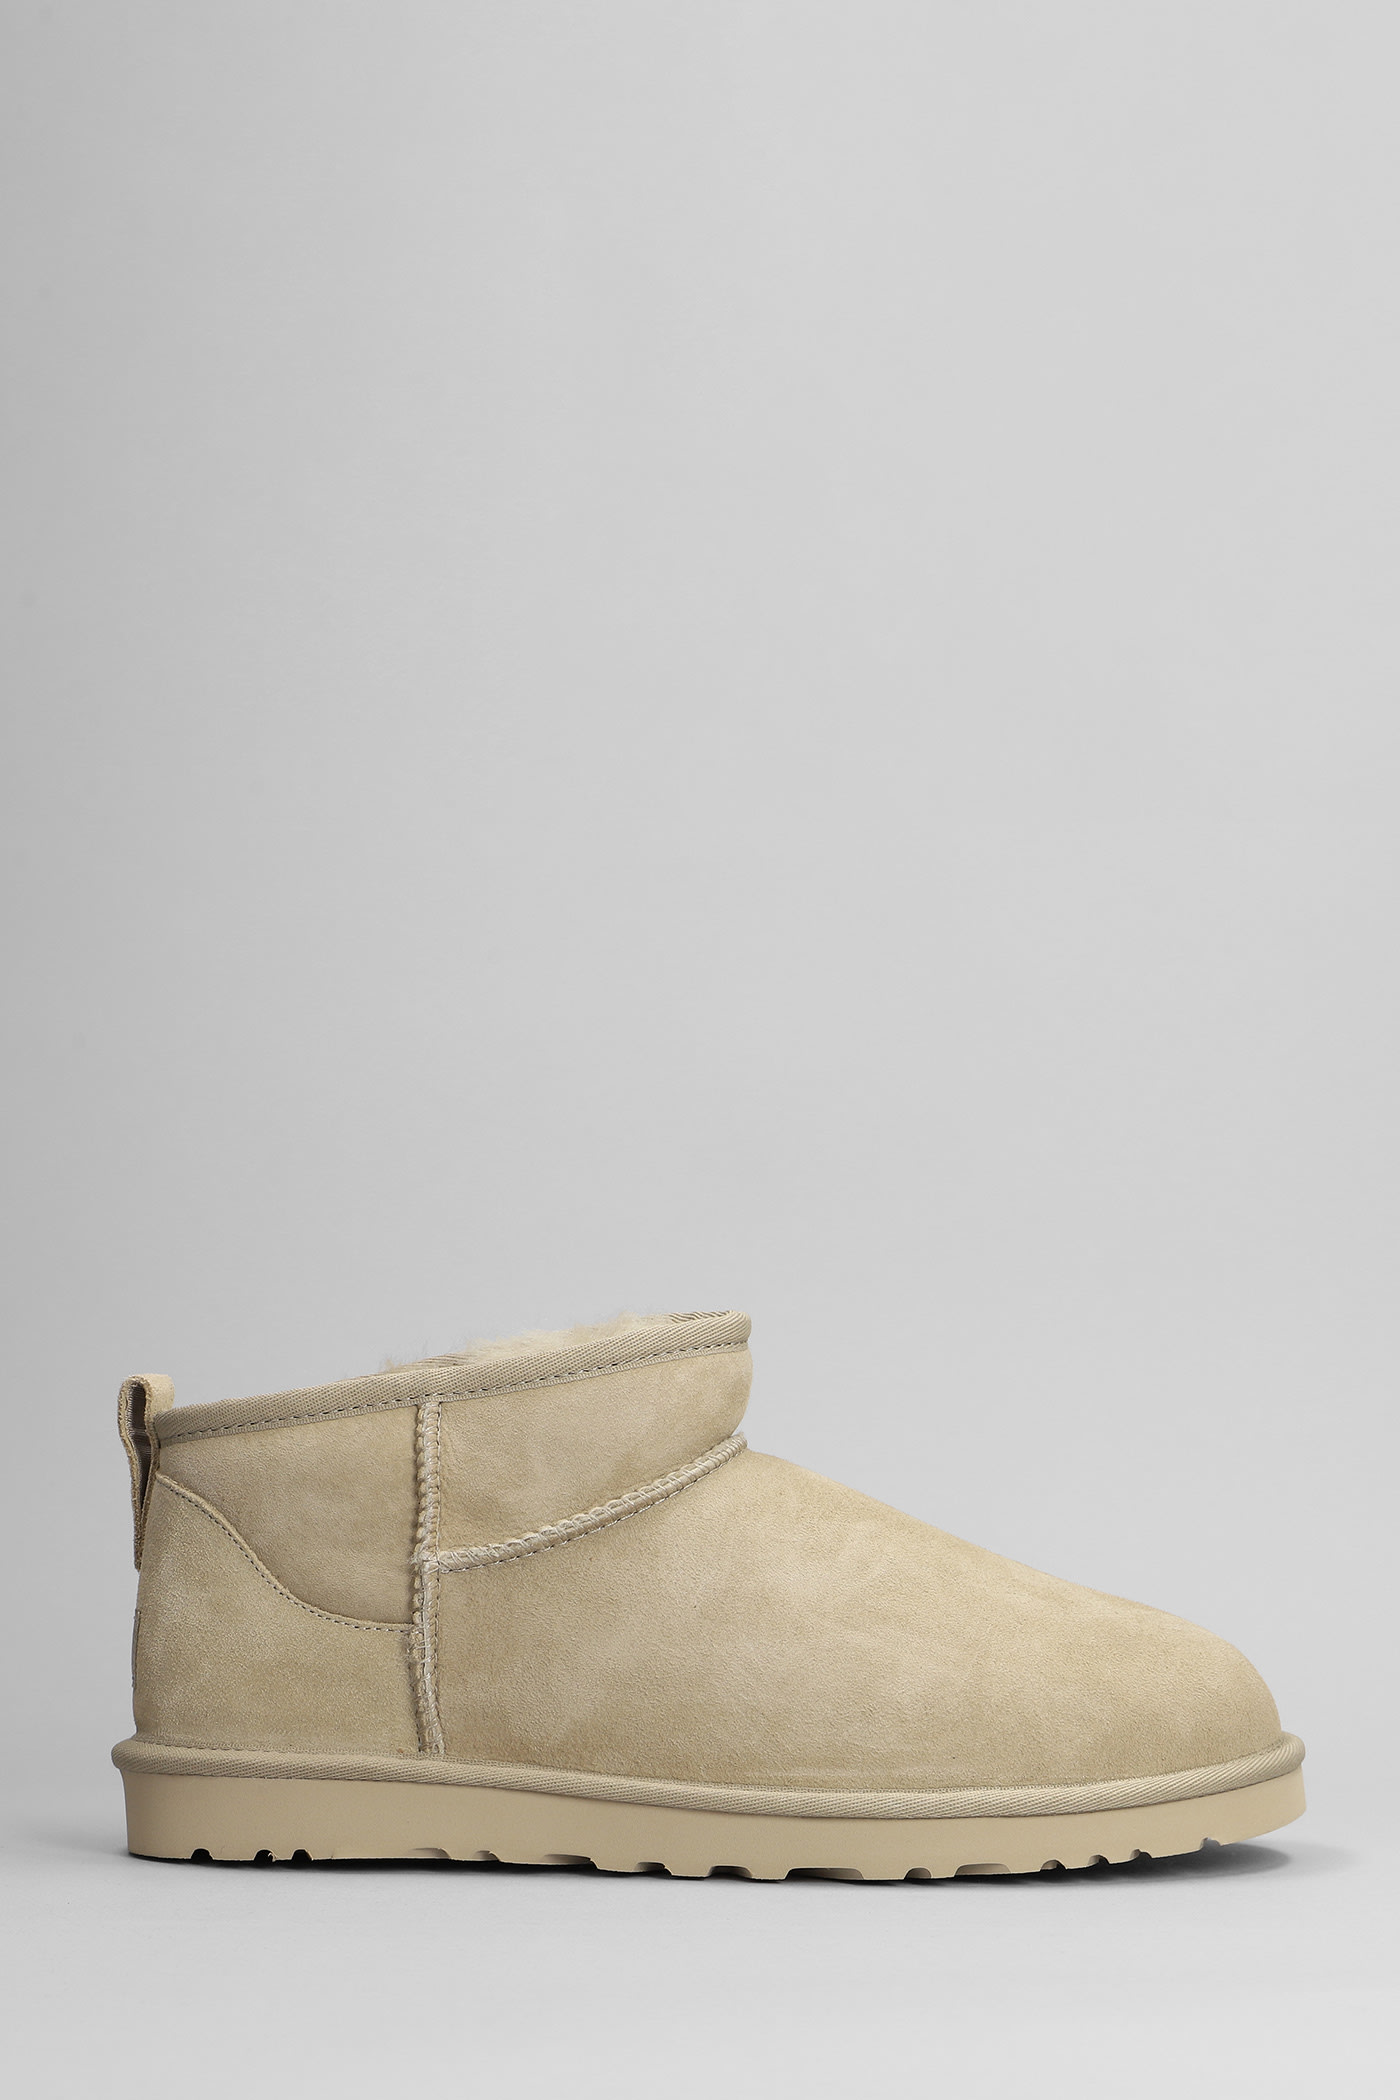 UGG CLASSIC ULTRA MINI LOW HEELS ANKLE BOOTS IN BEIGE SUEDE